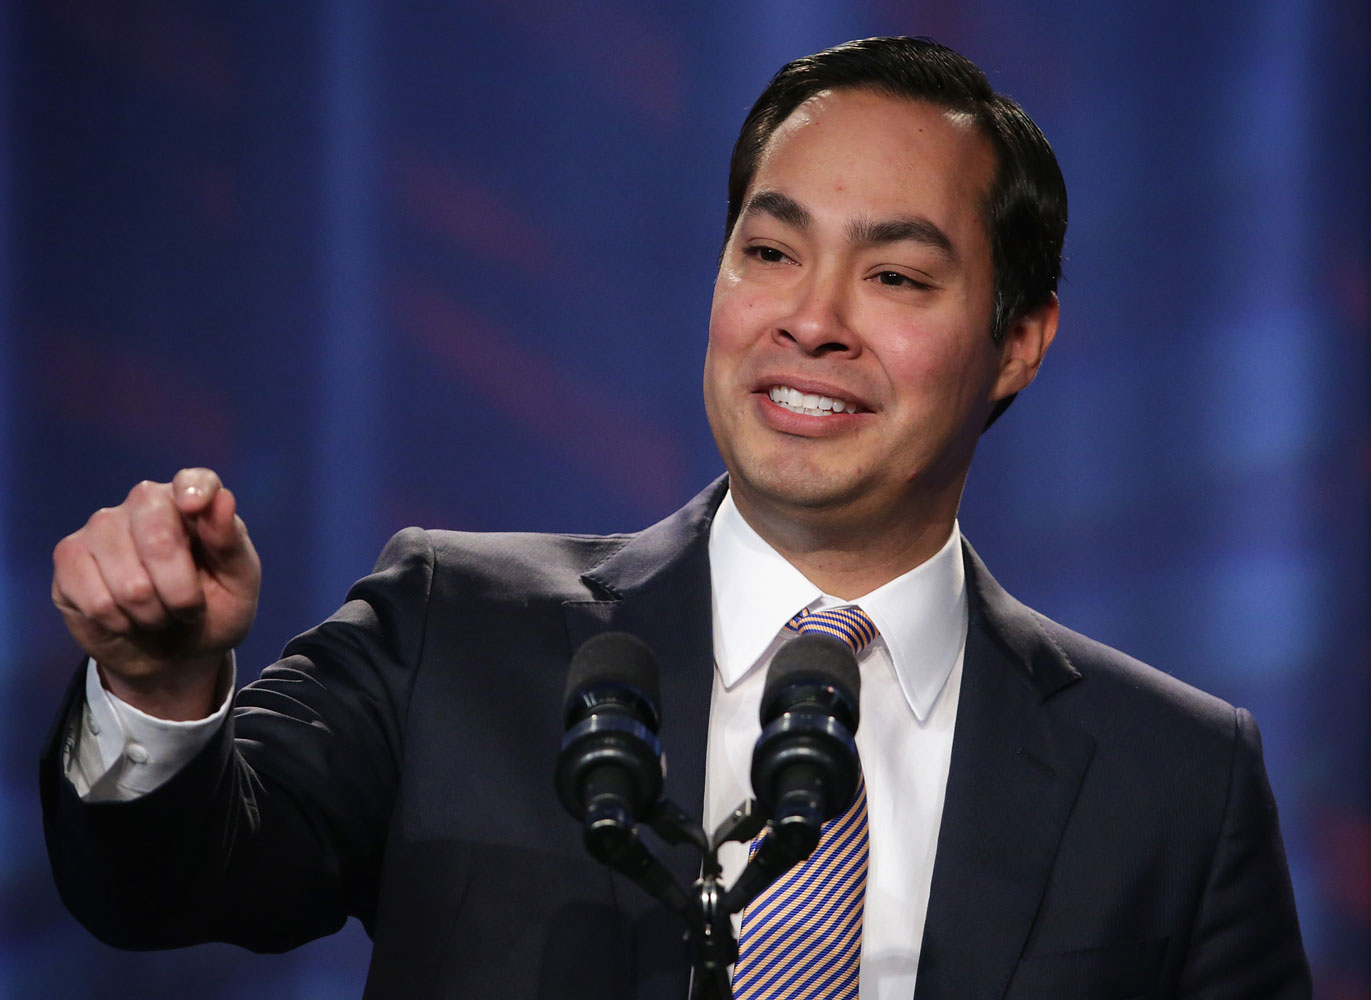 Mayor of San Antonio, Texas, Julian Castro speaks during the opening plenary session of Families USA's Health Action 2014 conference Jan. 23, 2014 in Washington, DC. Alex Wong—Getty Images (Alex Wong—Getty Images)